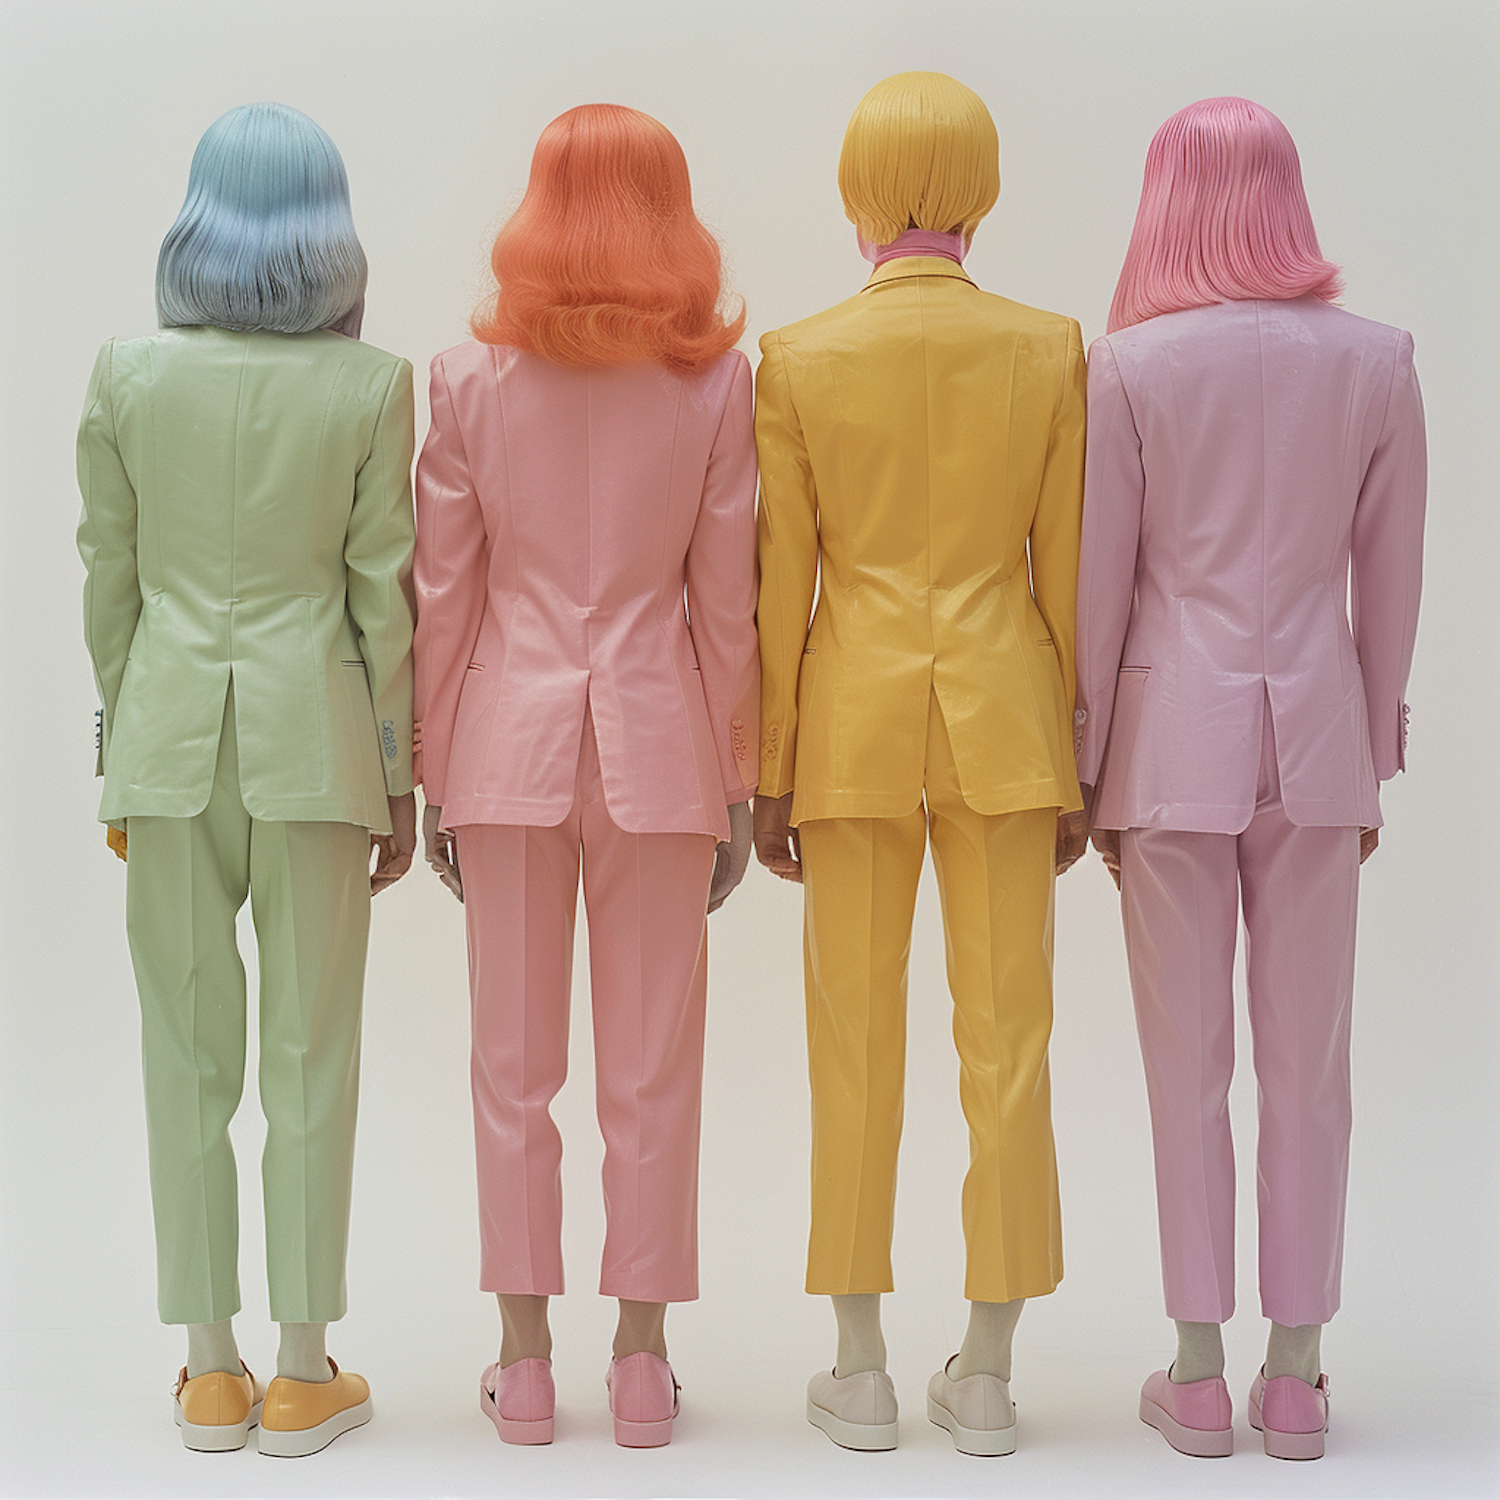 Colorful Suits and Hairstyles